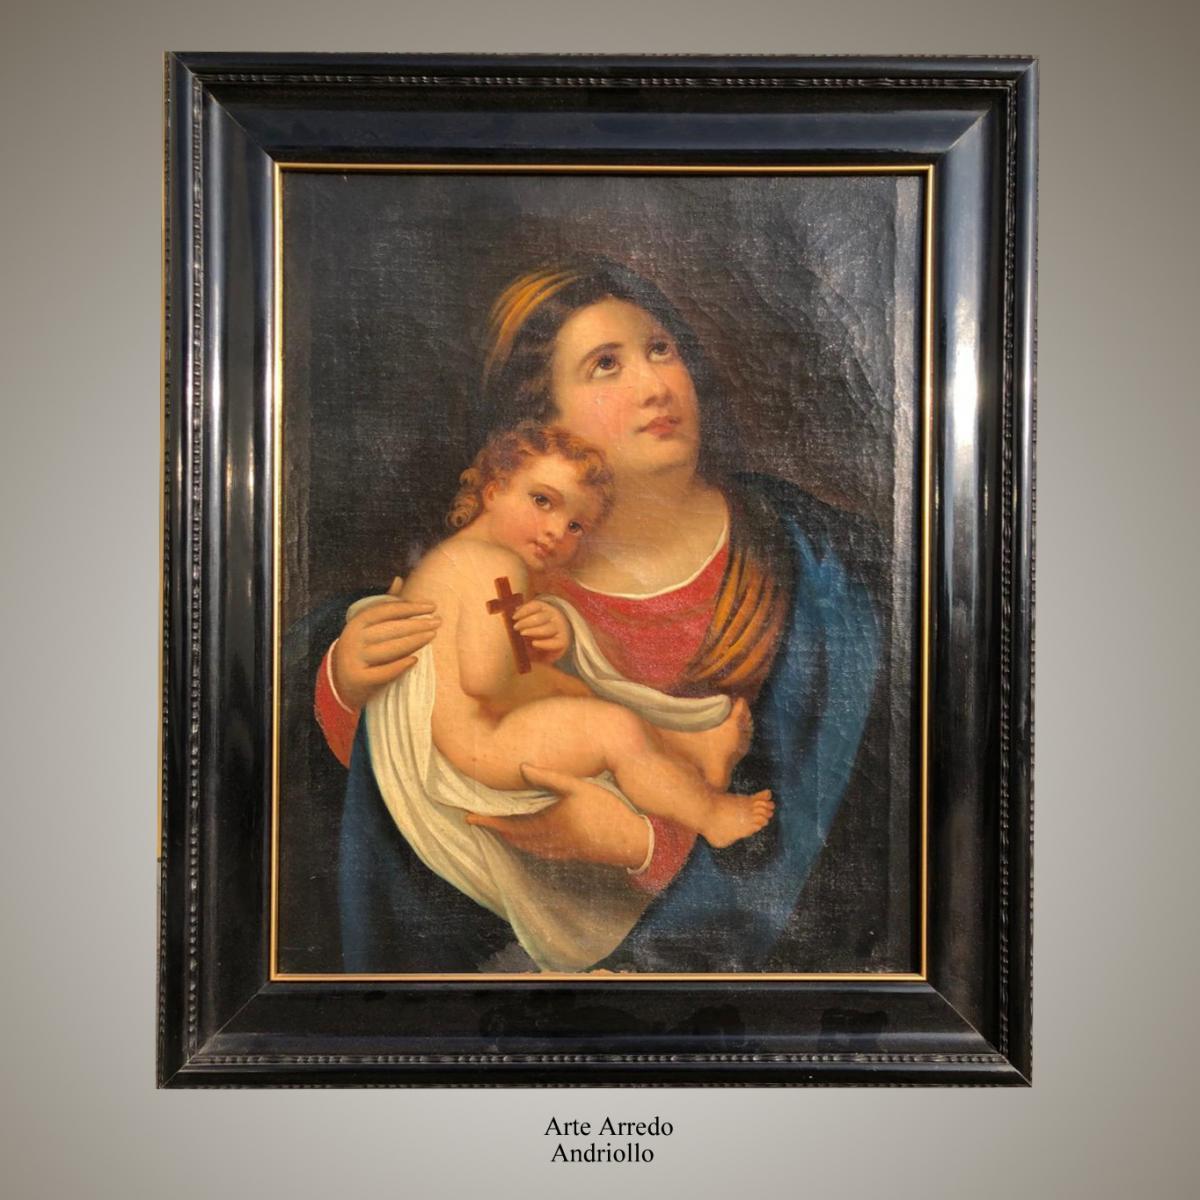 19th Century 18th Century Painting with Painting Depicting The Madonna and Child